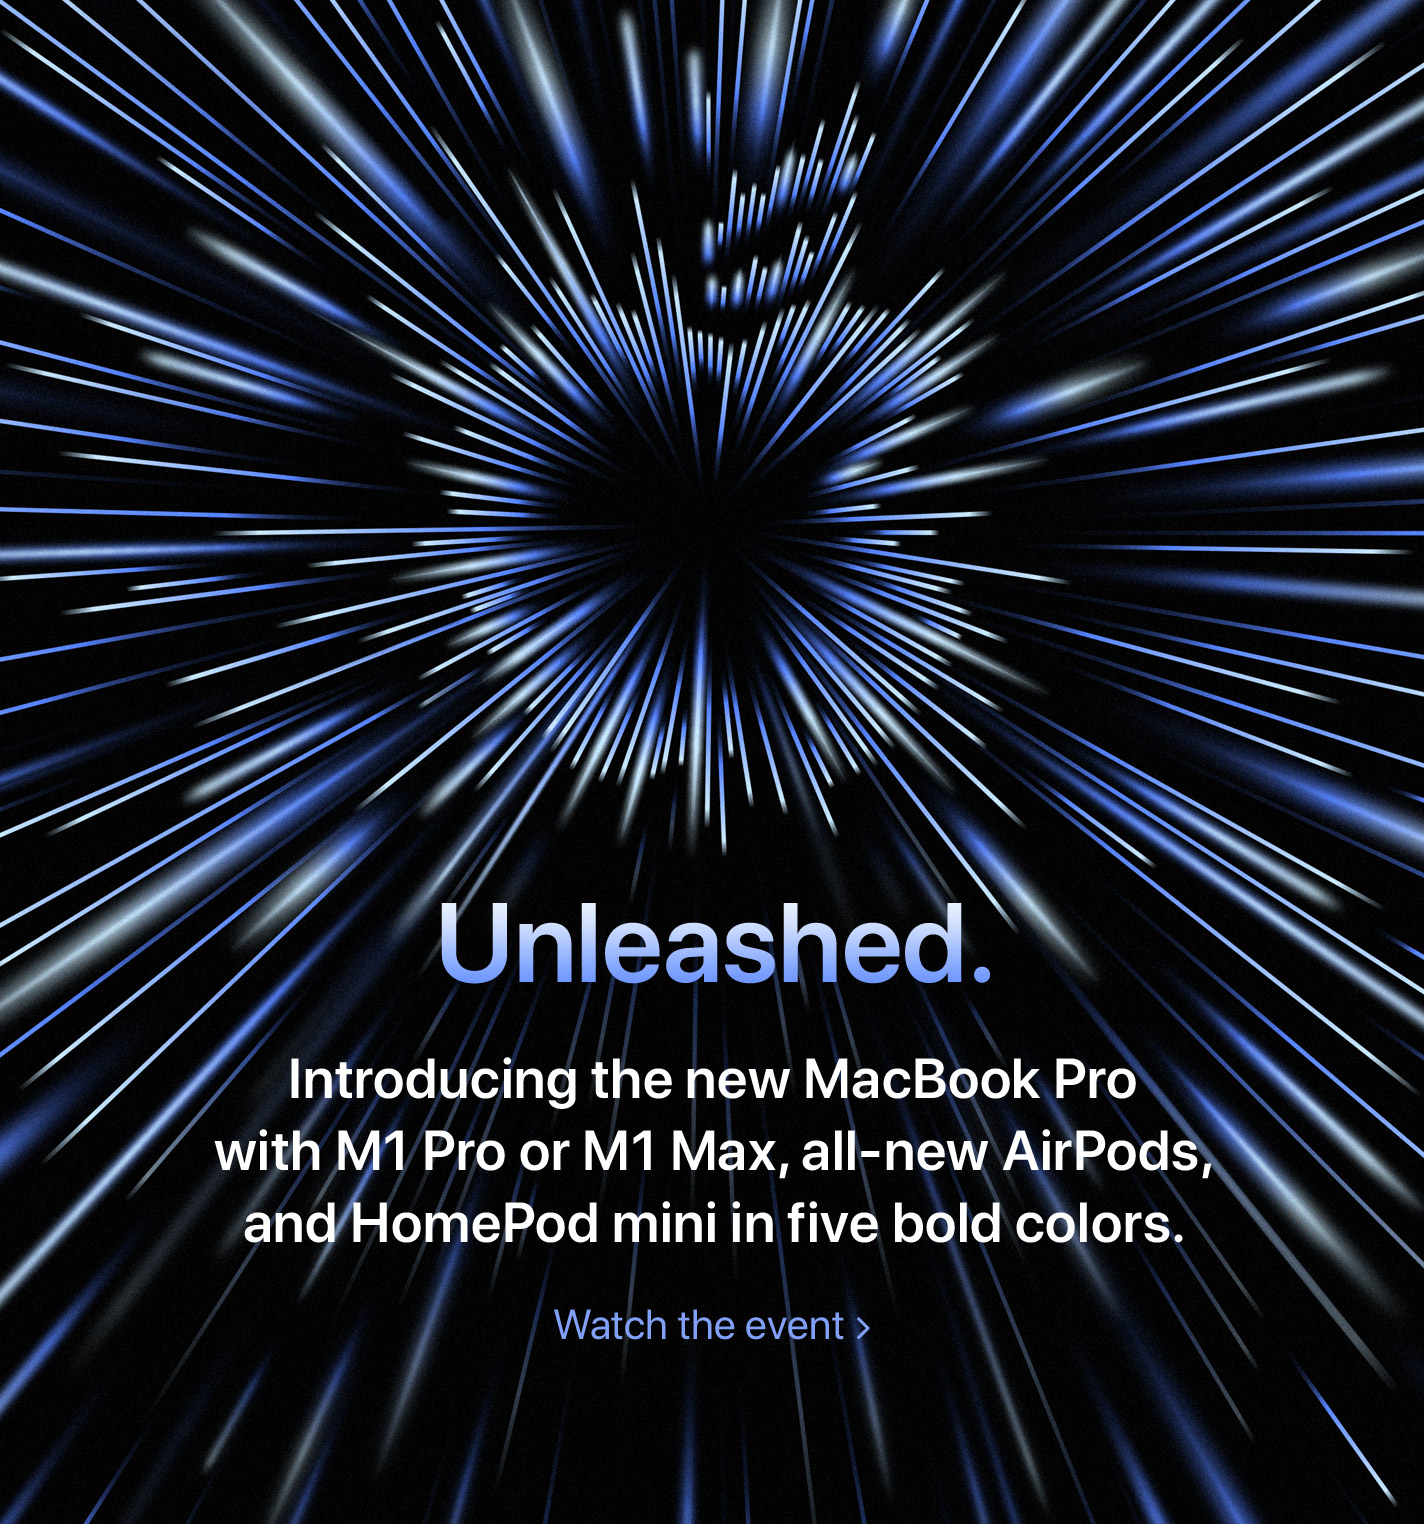 Unleashed.  Introducing the new MacBook Pro with M1 Pro or M1 Max, all-new AirPods, and HomePod mini in five bold colors.  Watch the event